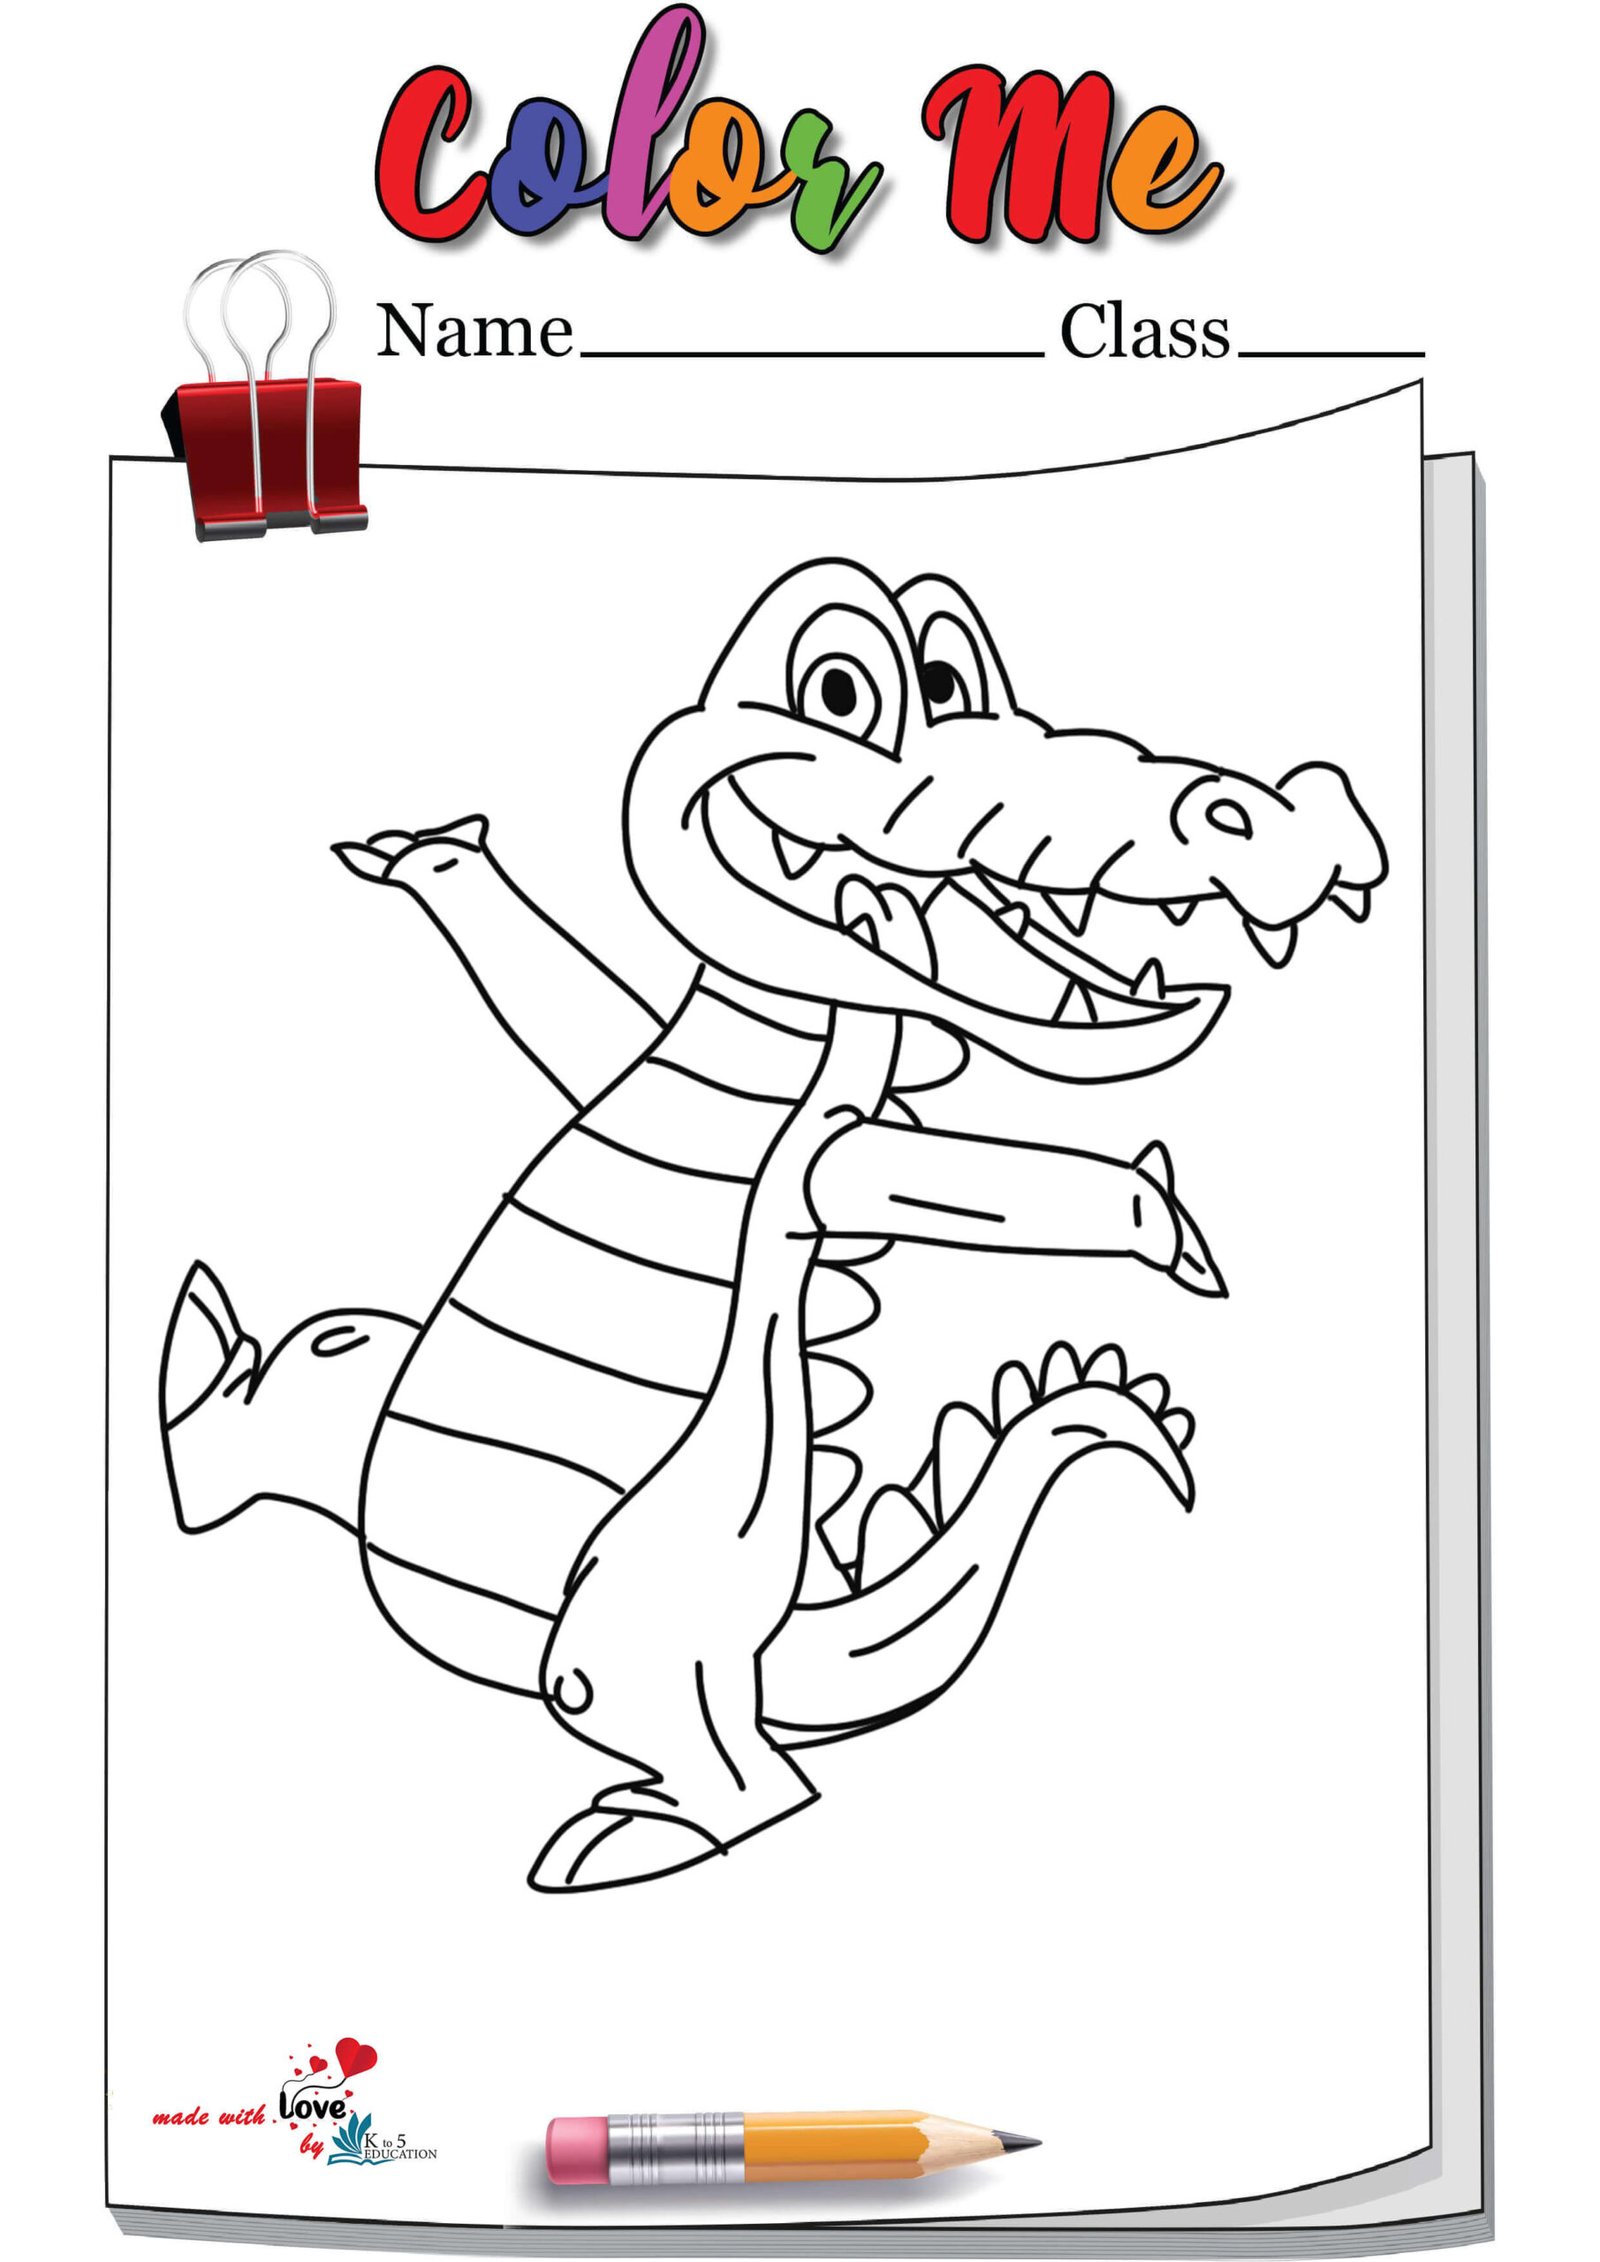 Funny Alligator Coloring Page